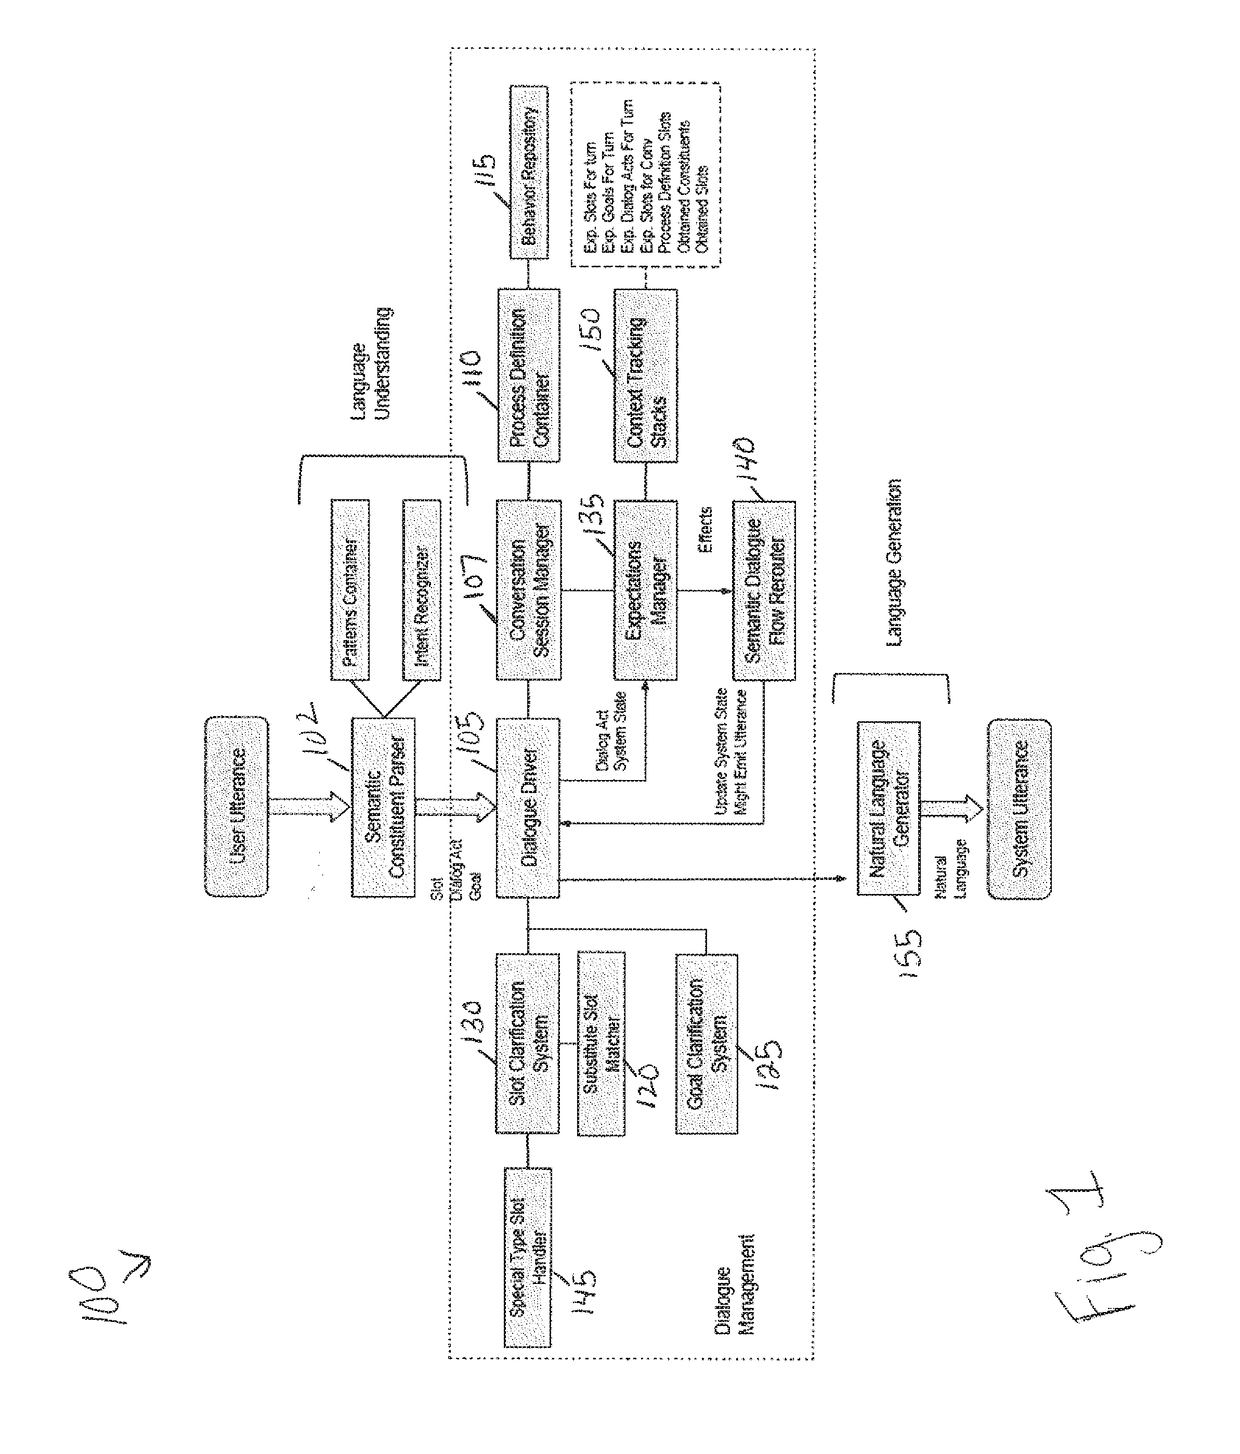 Systems and methods for generic flexible dialogue management